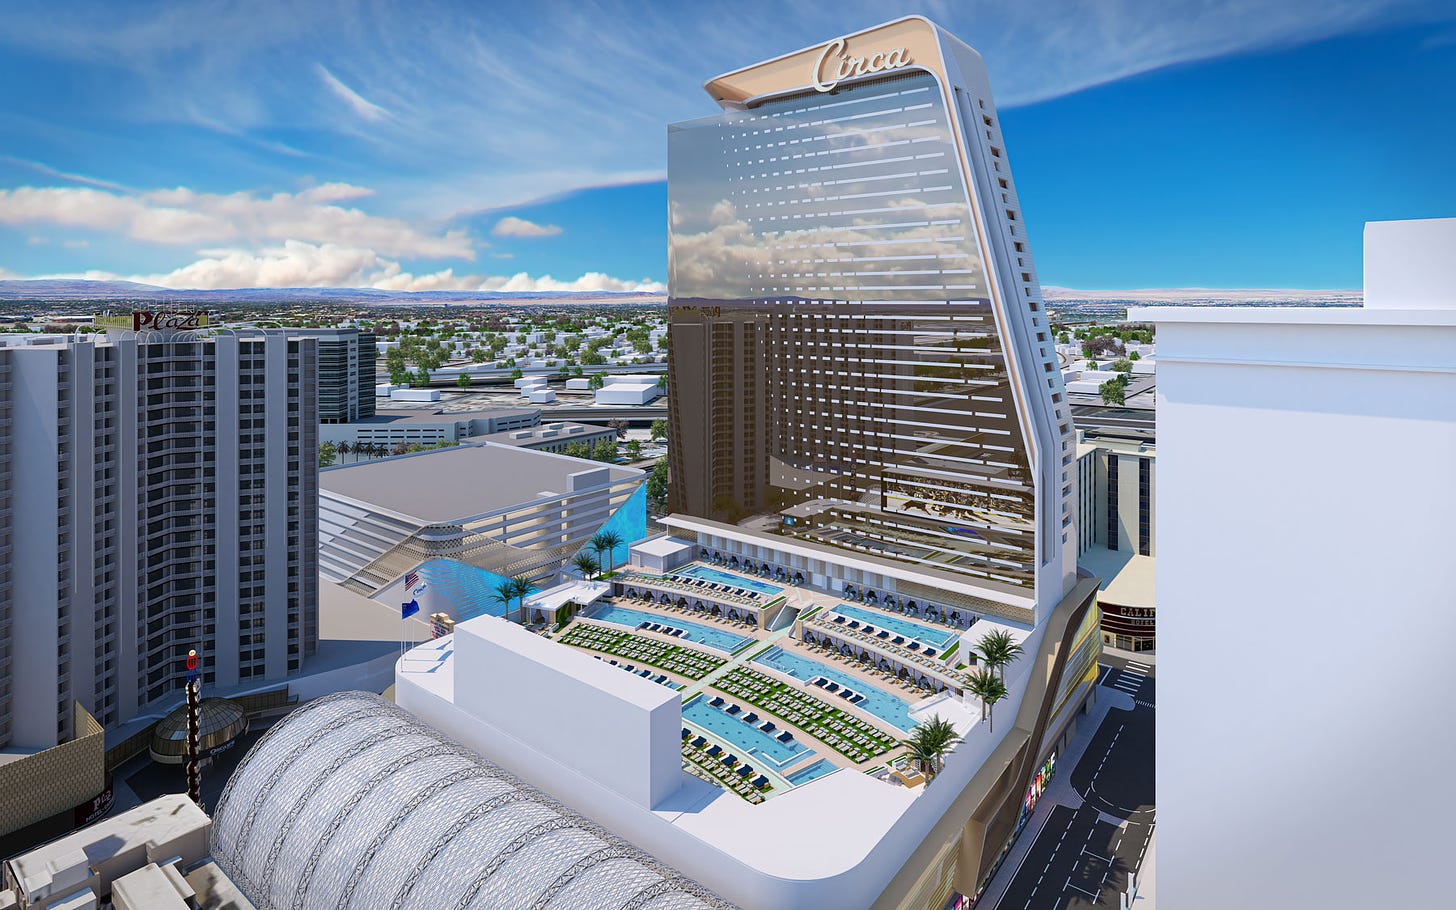 The First-ever Adults-only Casino in Vegas Will Have America's Largest Pool  Amphitheater | Travel + Leisure | Travel + Leisure